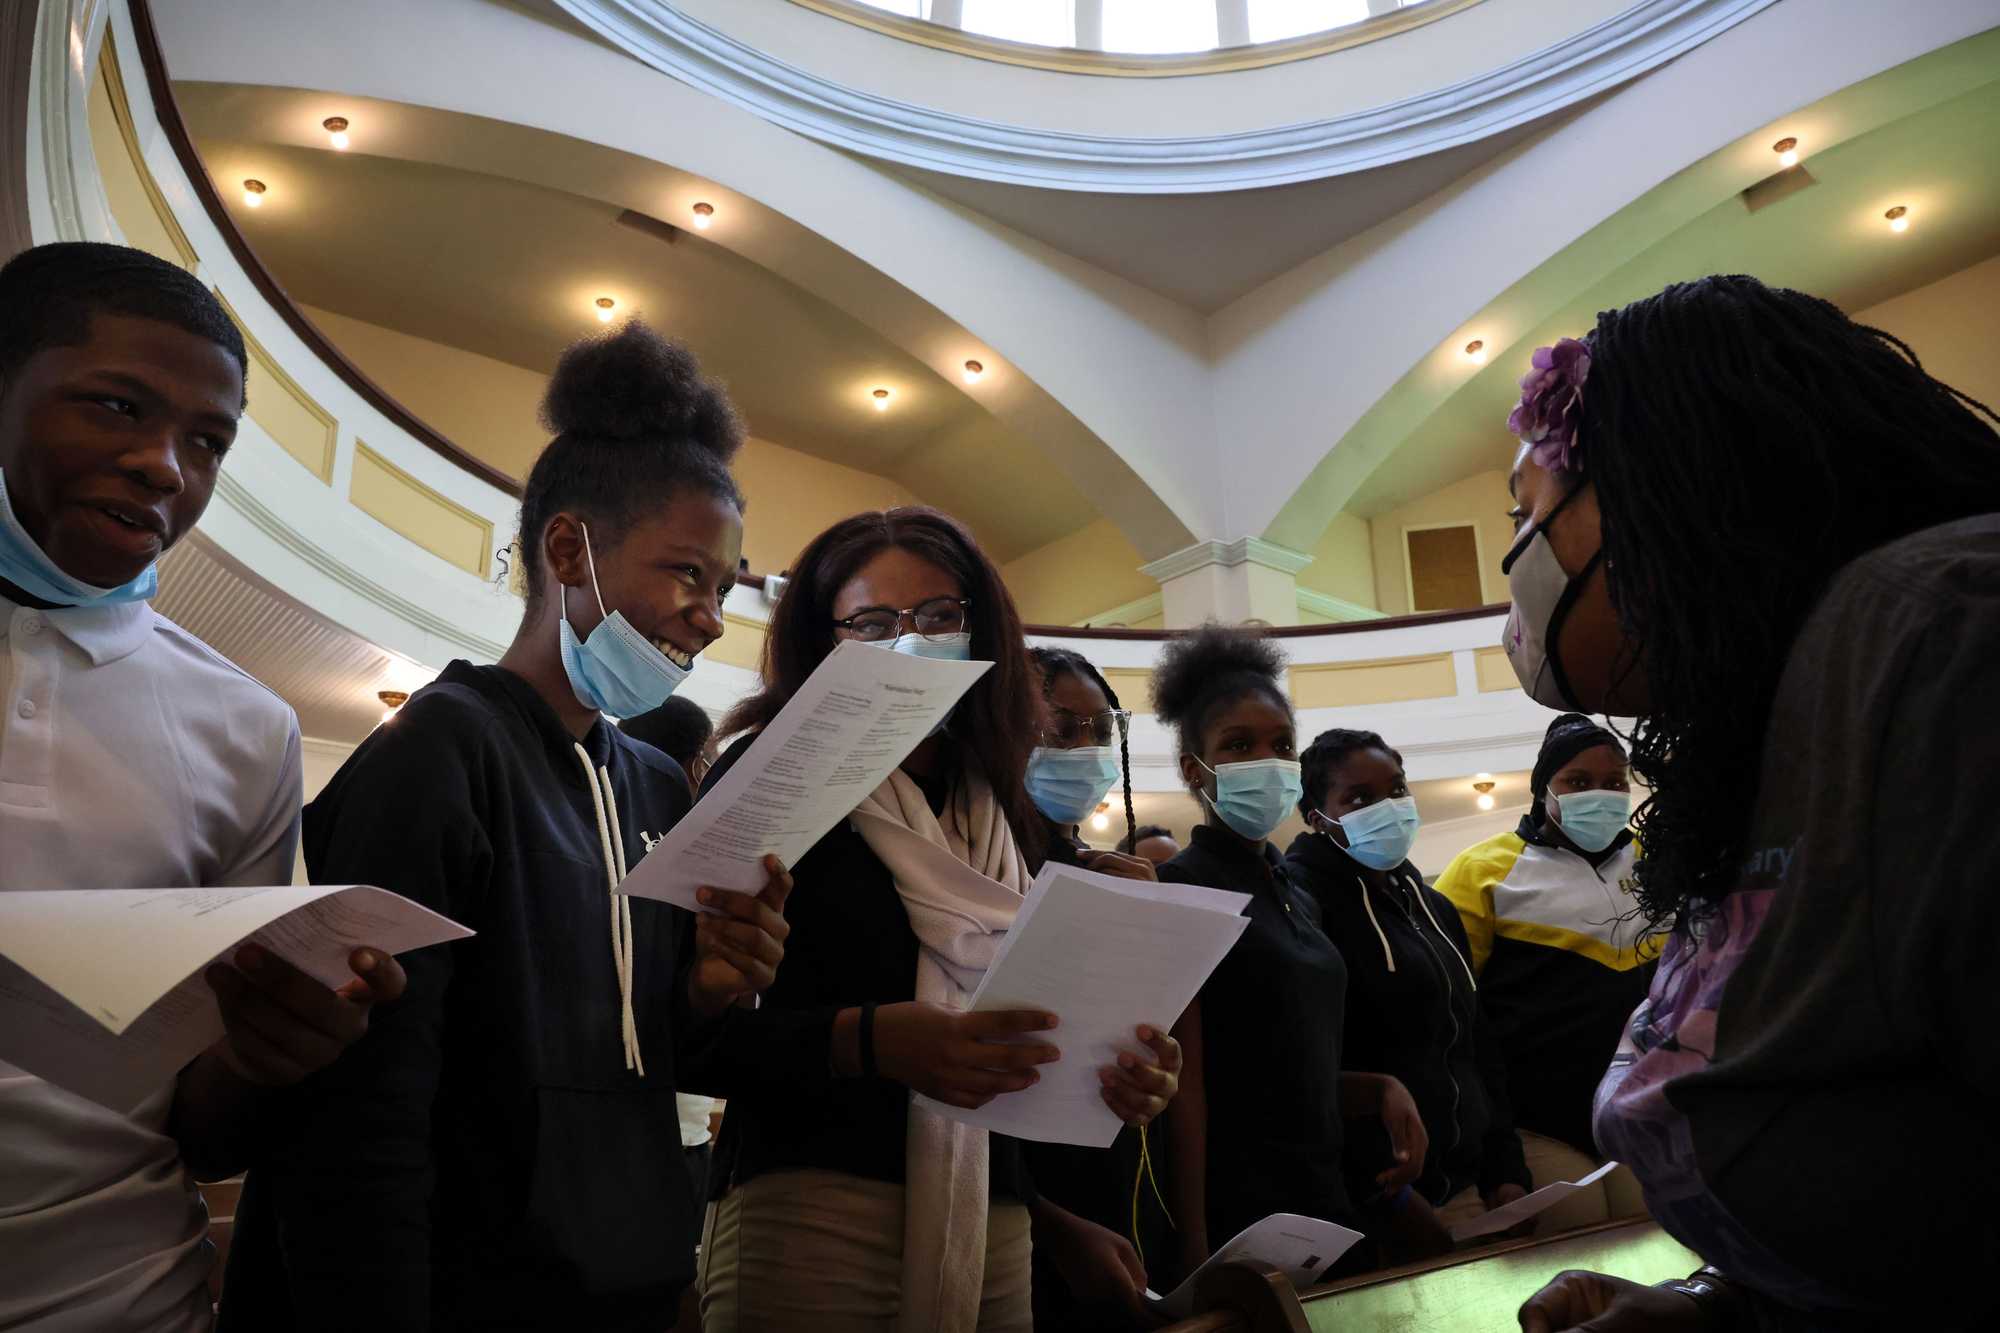 From left: Students Diangelo Acoff, Taylor Davis, and Ayiraa Fortier got direction from Ainka Sanders Jackson (right), the founding executive director of the Selma Center for Nonviolence, Truth and Reconciliation, during a workshop at the Tabernacle Baptist Church.